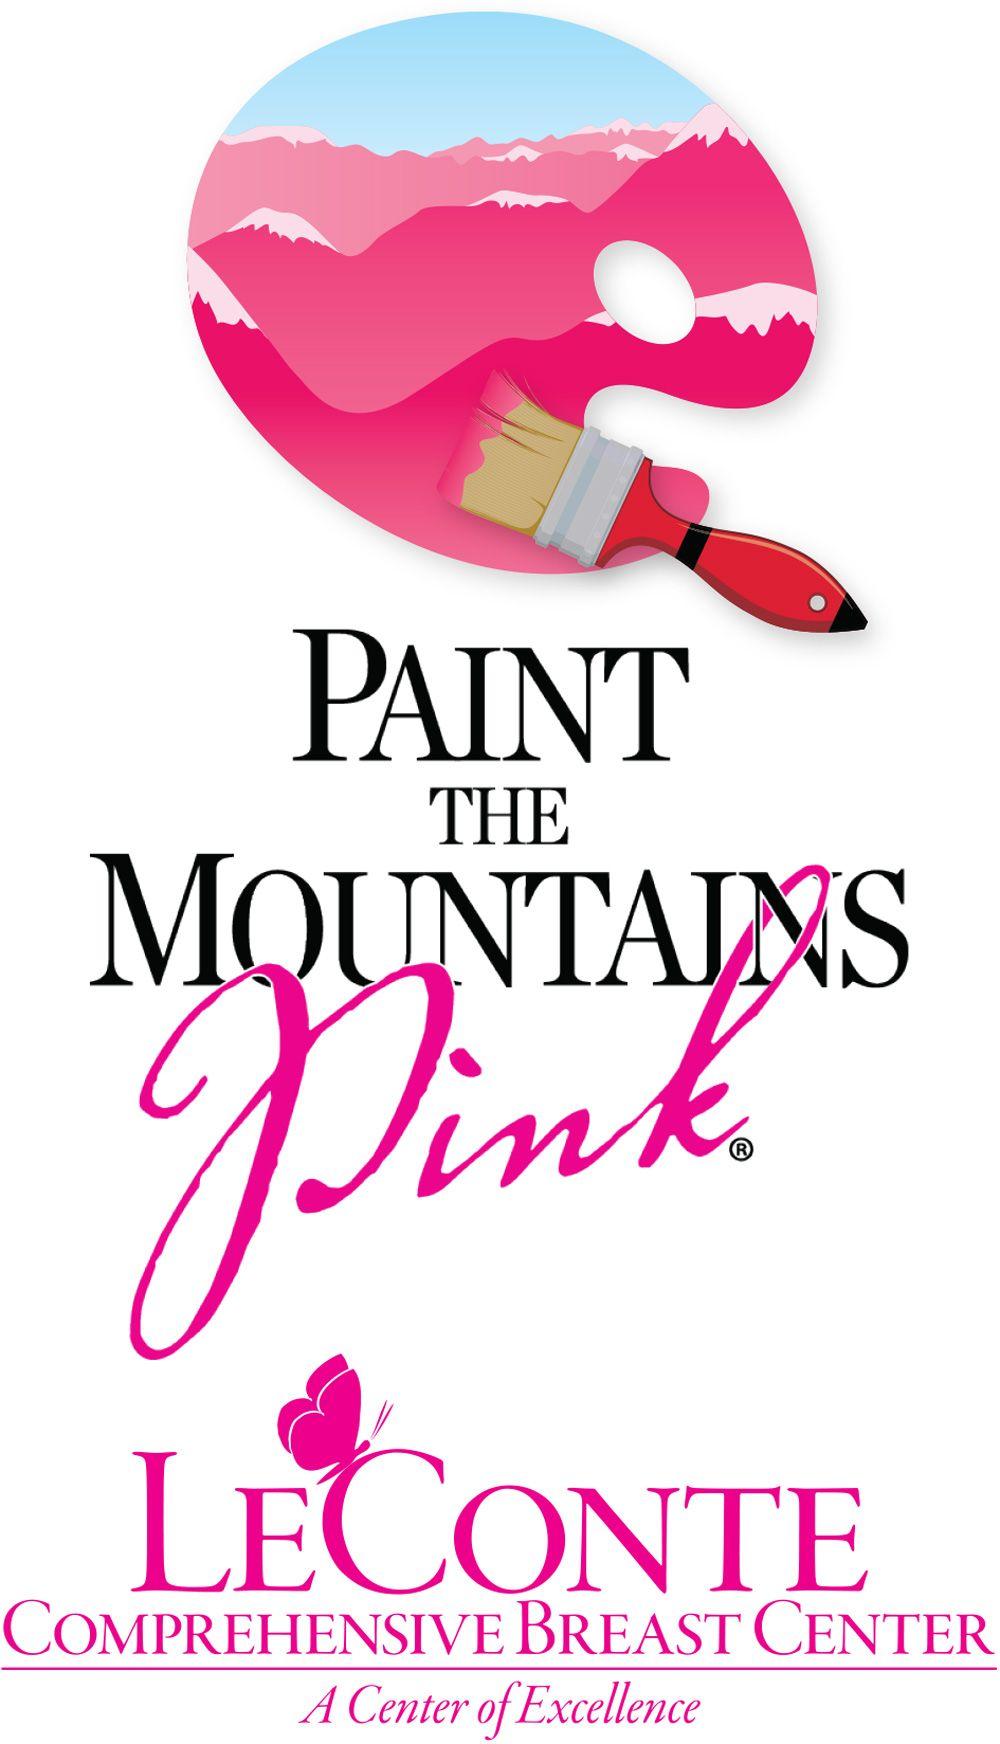 Mountains with Pink Logo - Combined Paint the Mountains Pink and Leconte Comprehensive Breast